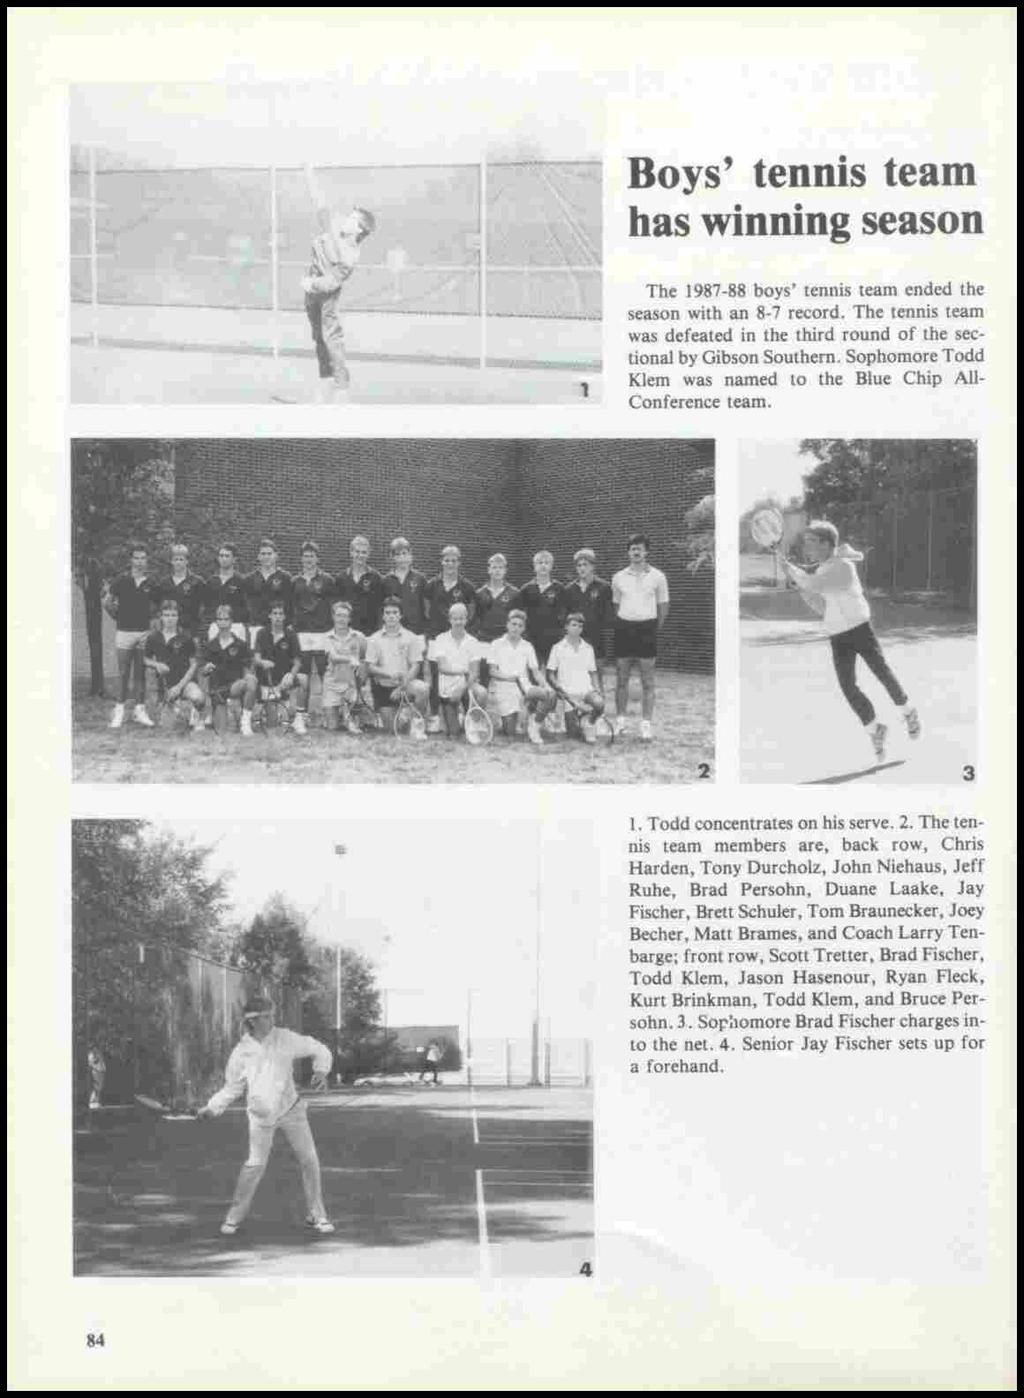 Boys' tennis team has winning season 1 The 1987-88 boys' tennis team ended the season with an 8-7 record. The tennis team was defeated in the third round of the sectional by Gibson Southern.